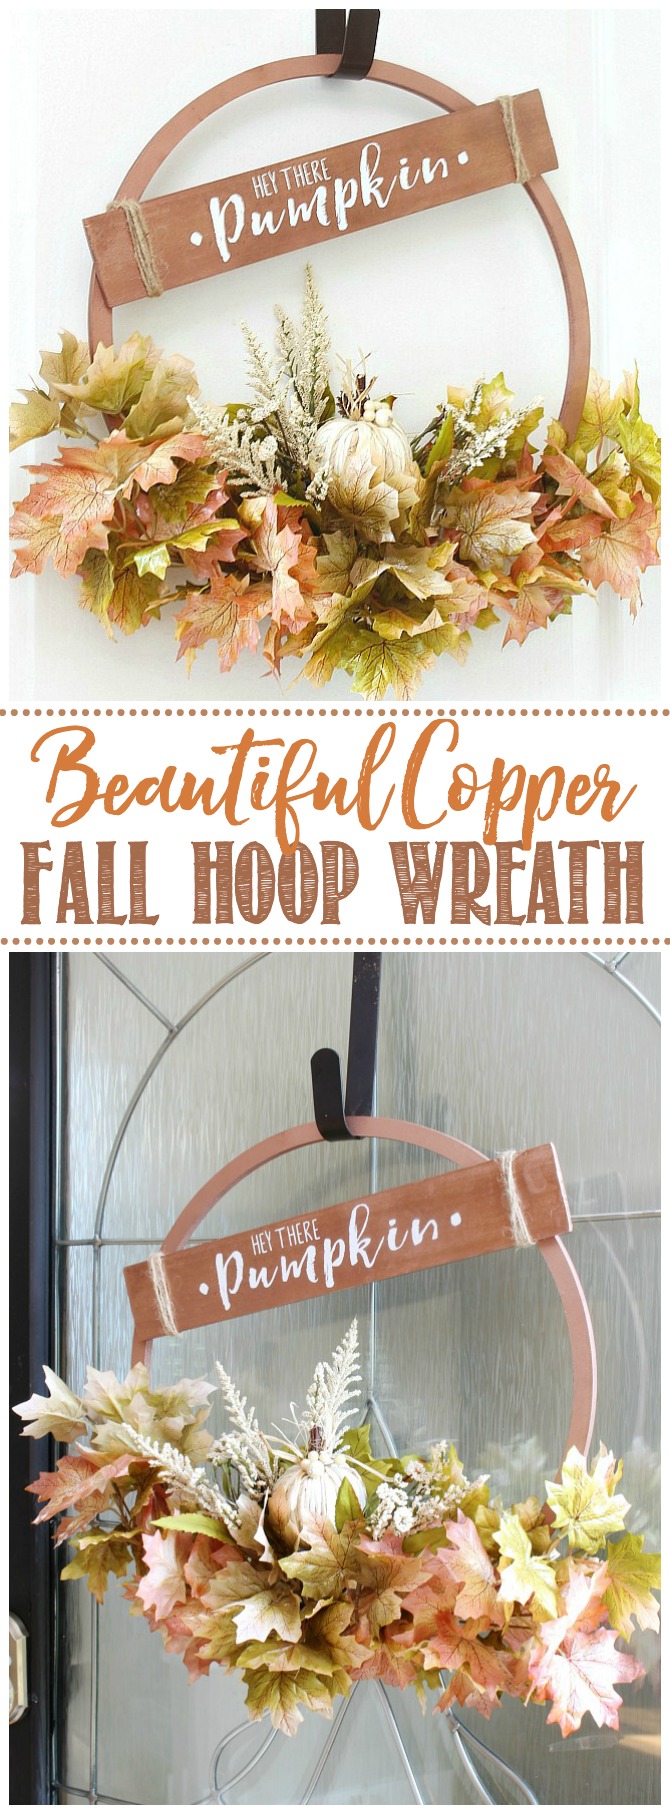 Beautiful copper hoop wreath for fall with 'Hey There Pumpkin' sign.